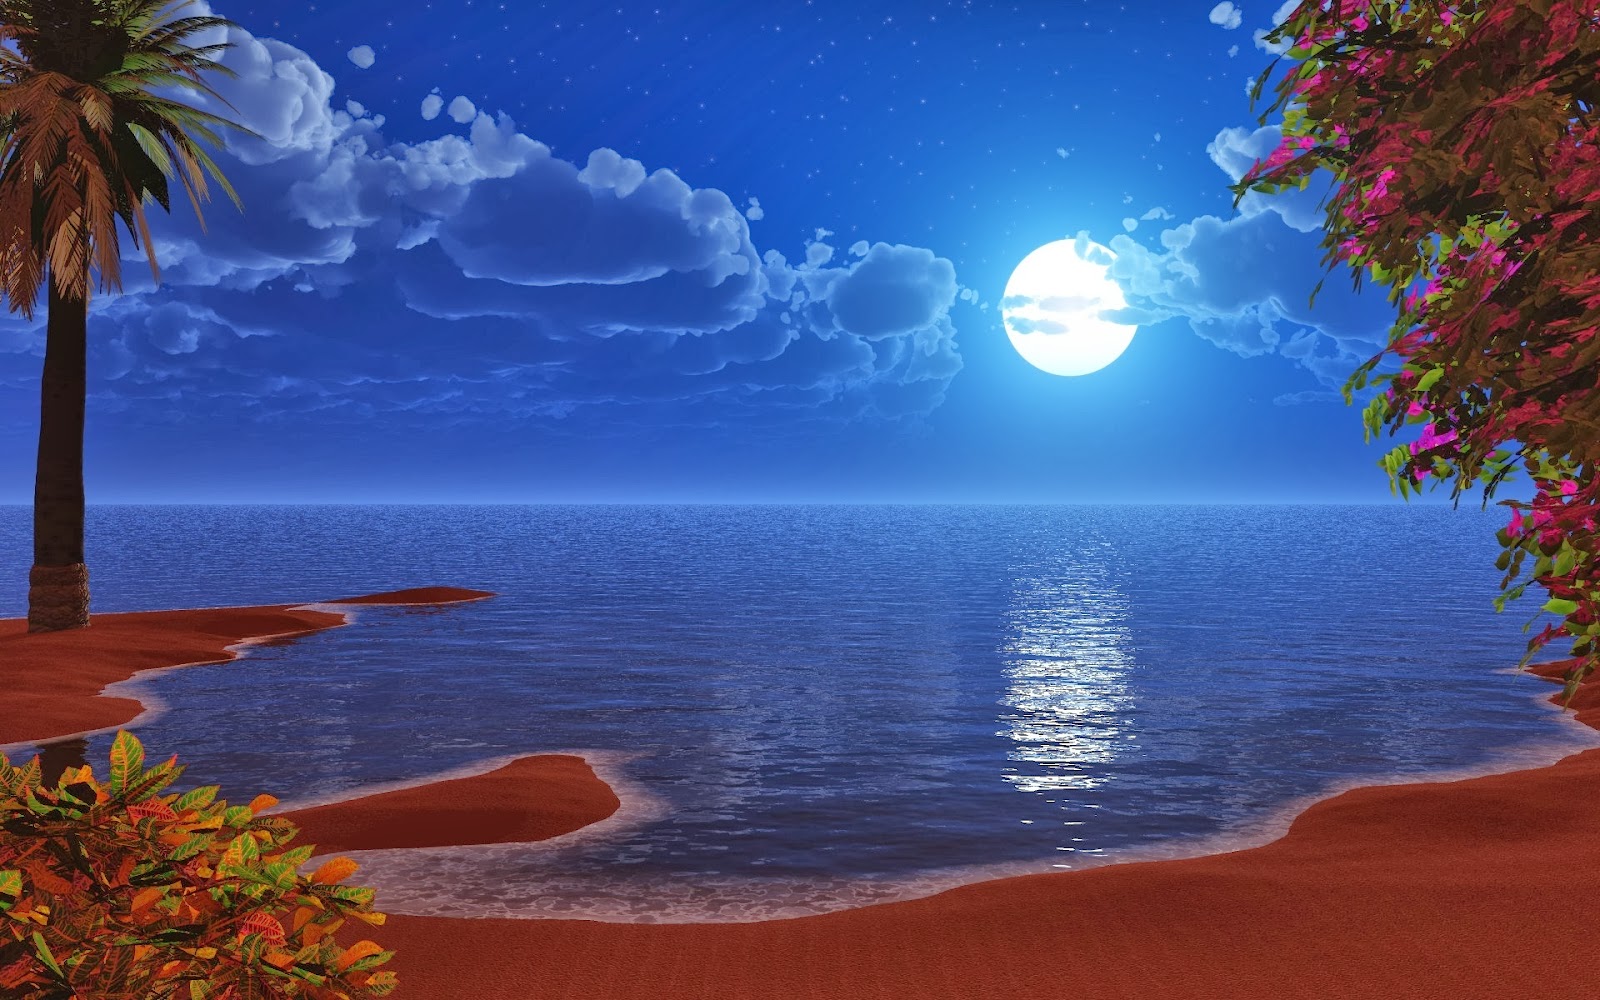 HD Night Beach WallPapers   Wallpapers Free